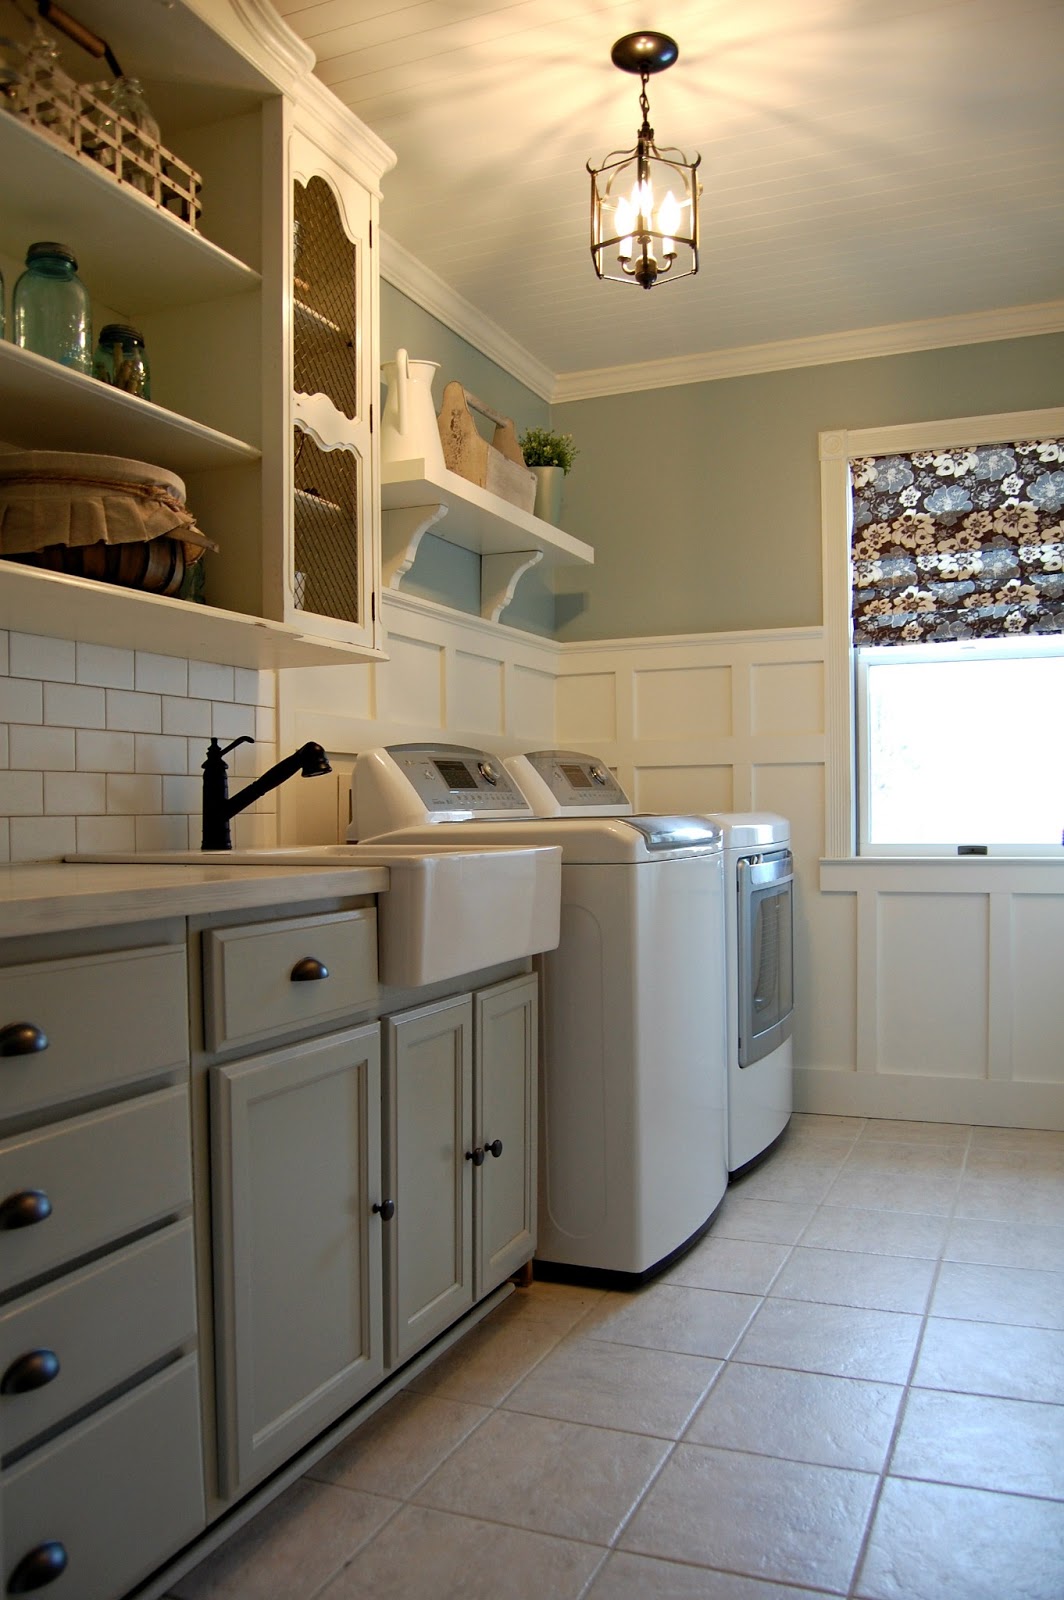 Roly Poly Farm Laundry Room Reveal